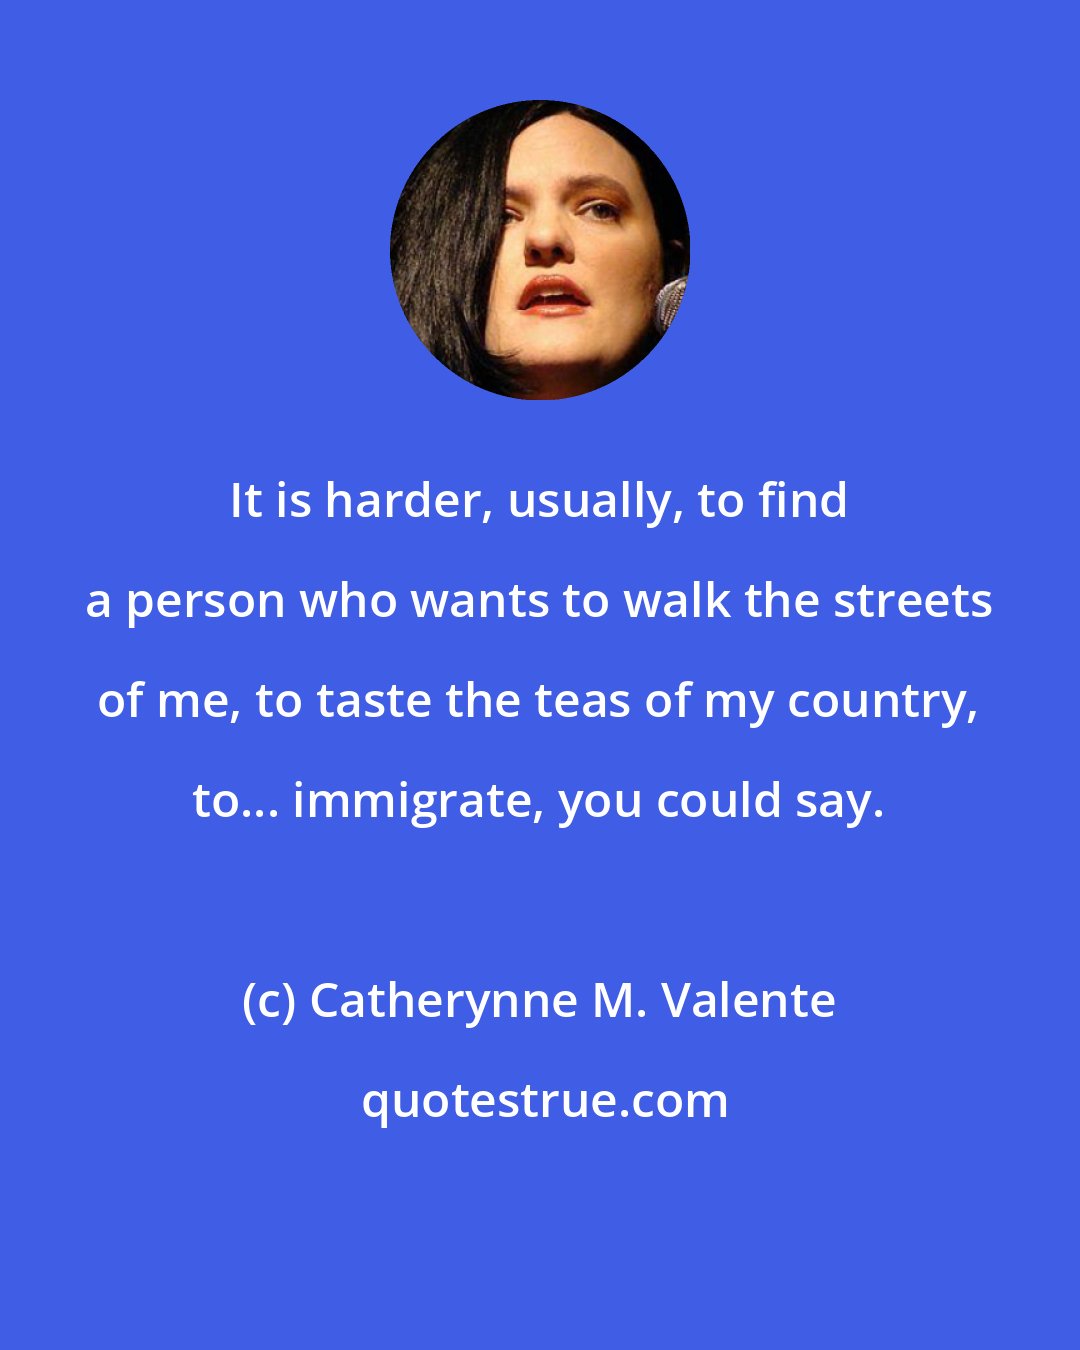 Catherynne M. Valente: It is harder, usually, to find a person who wants to walk the streets of me, to taste the teas of my country, to... immigrate, you could say.